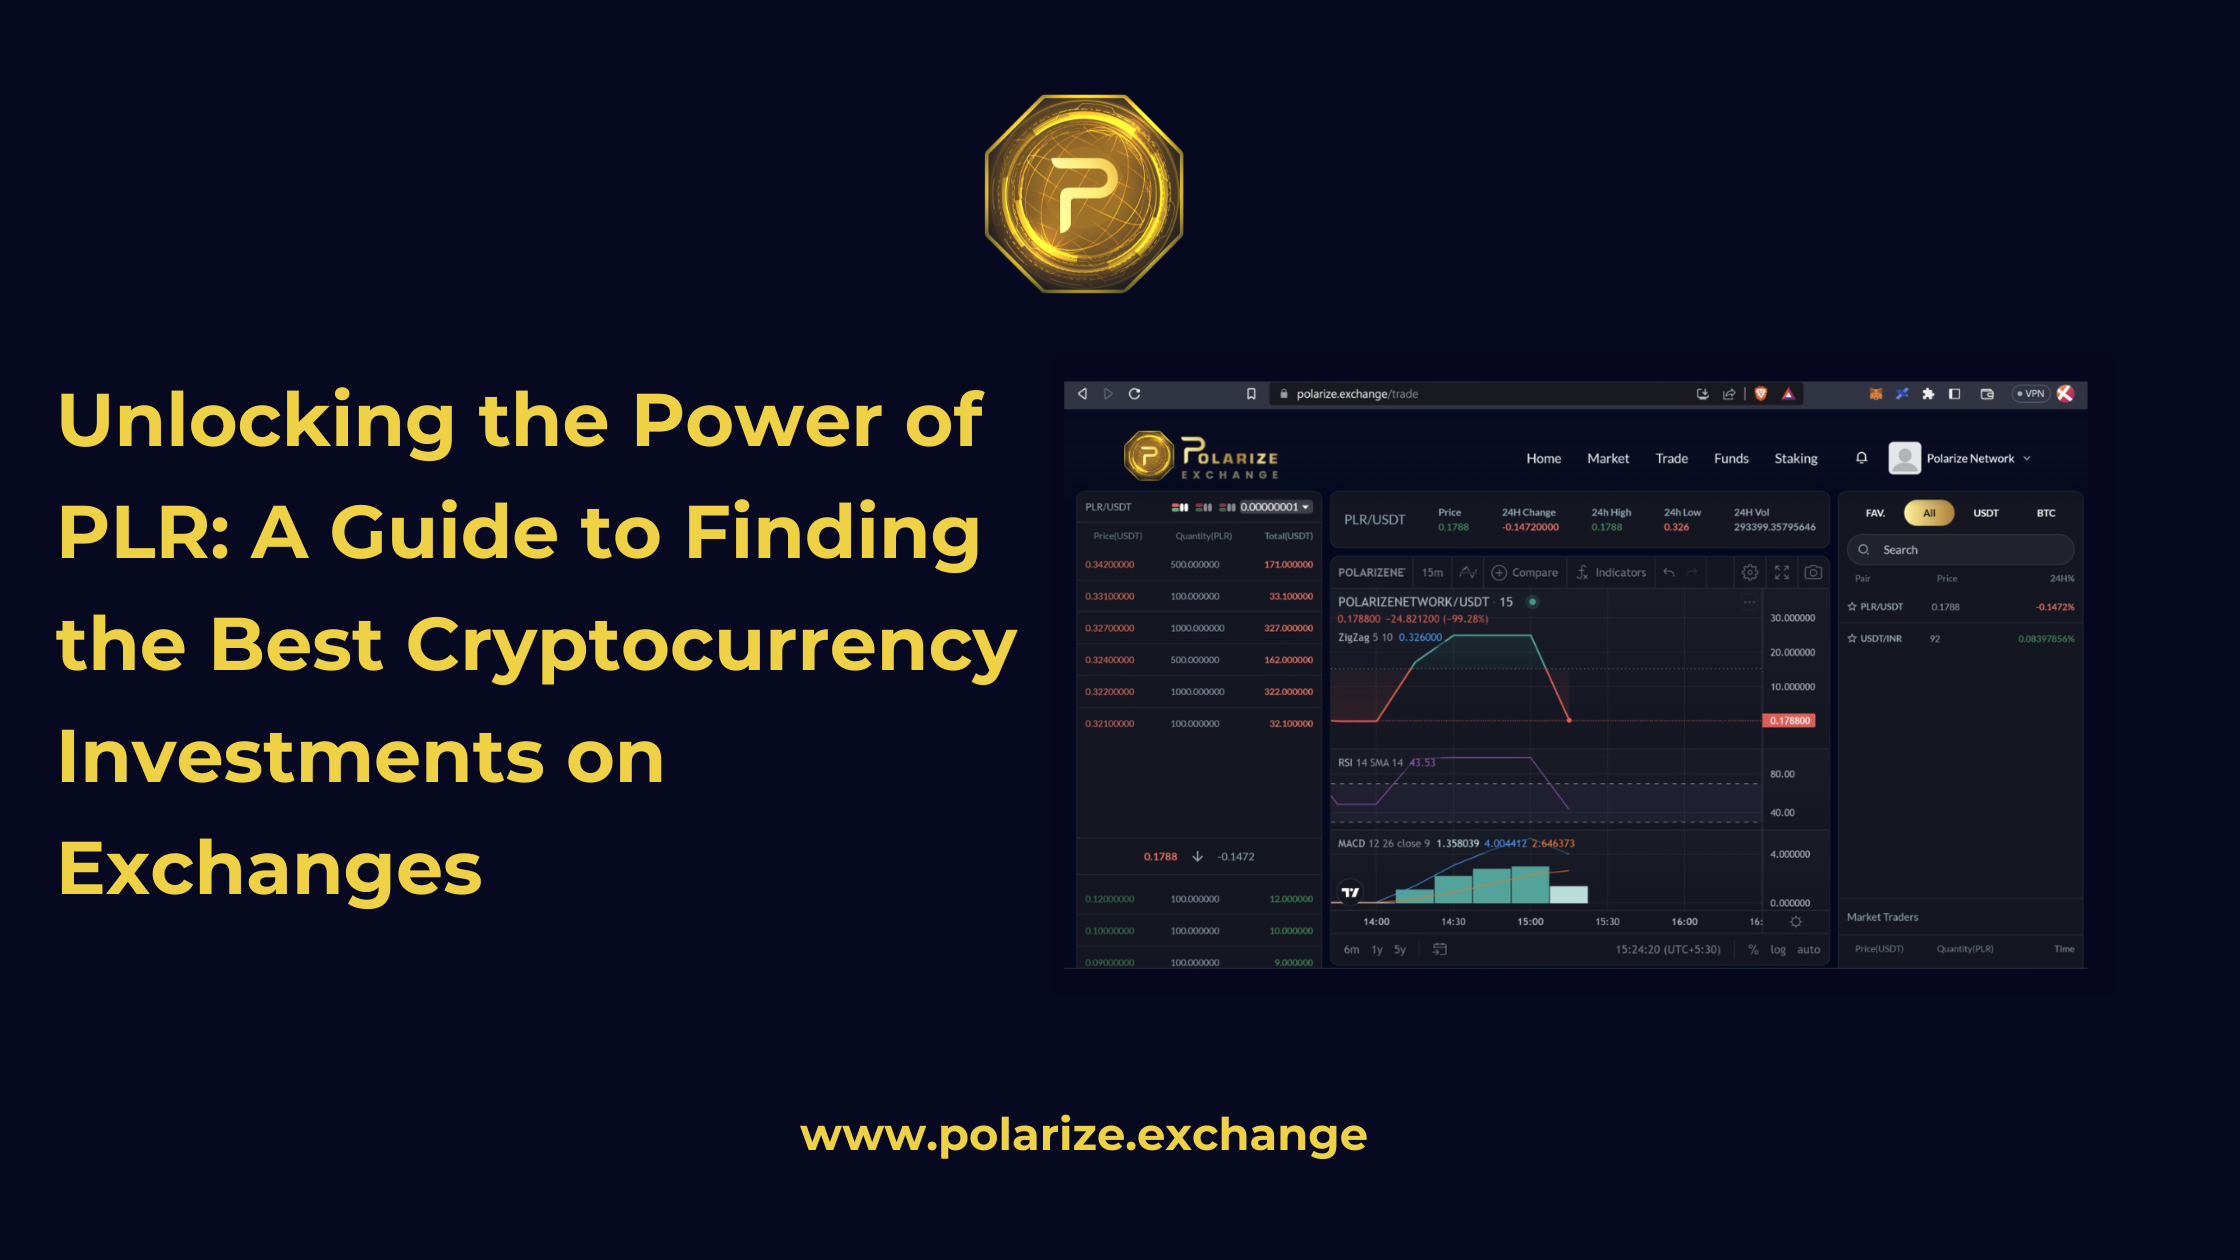 Unlocking the Power of PLR: A Guide to Finding the Best Cryptocurrency Investments on Exchanges